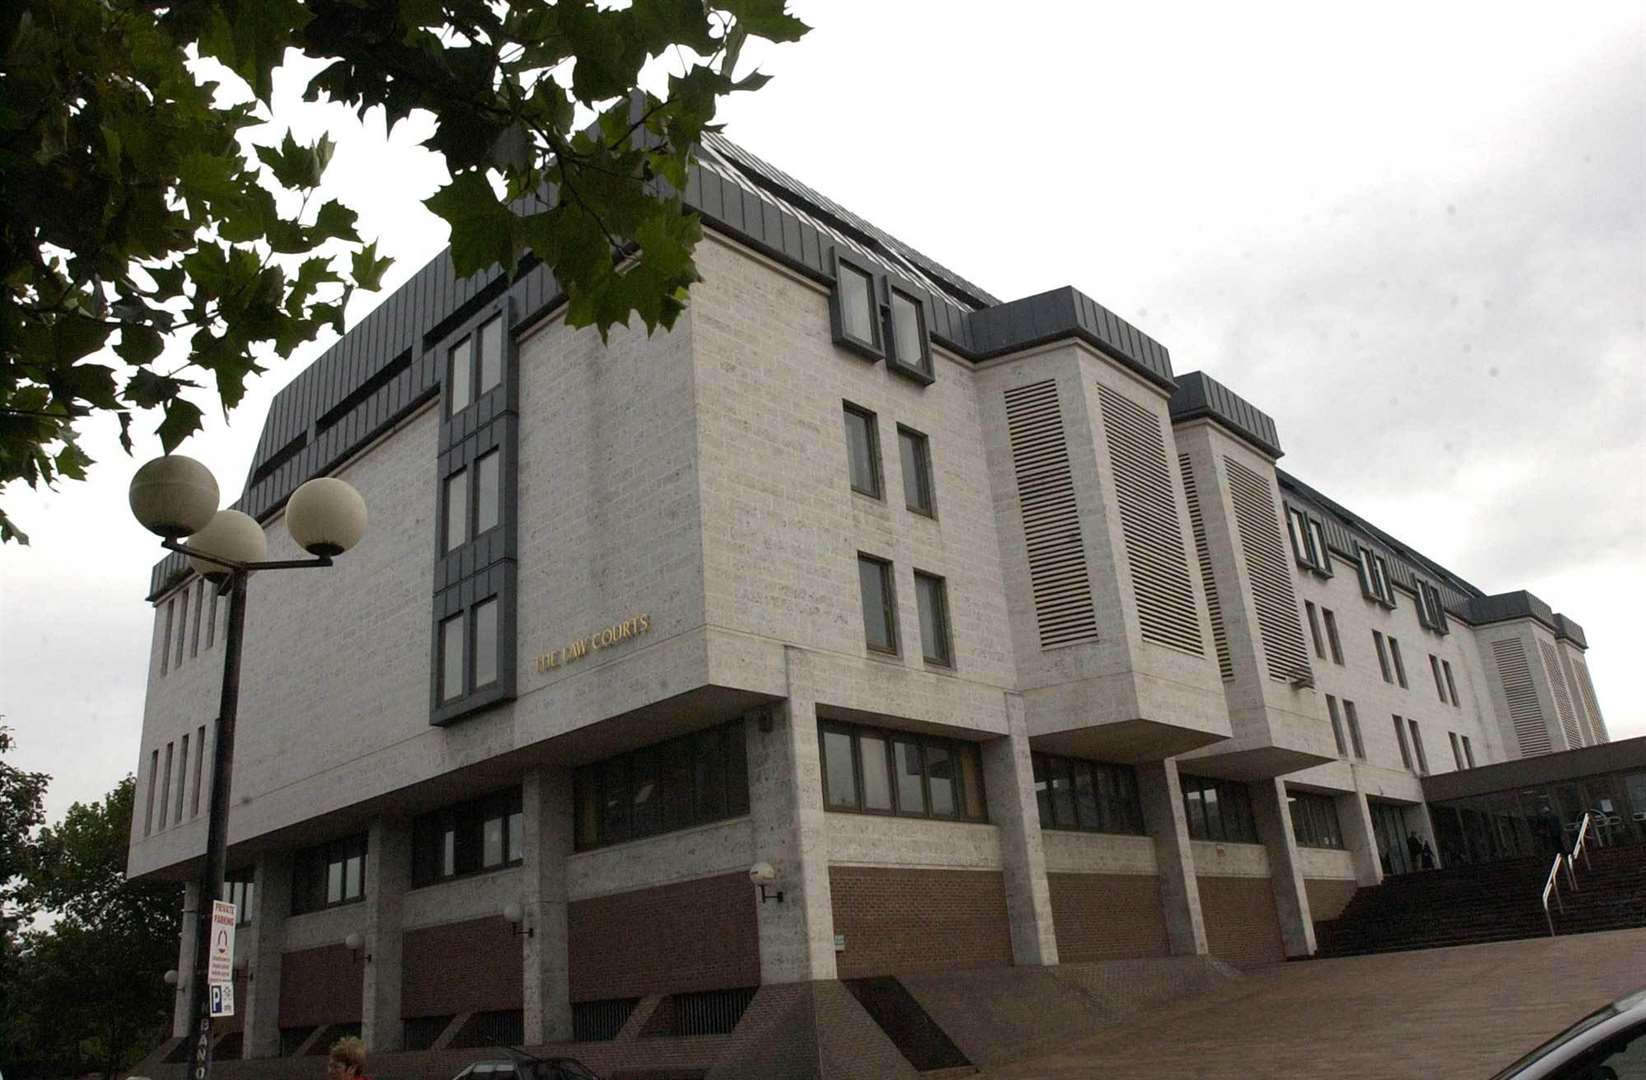 The case was at Maidstone Crown Court